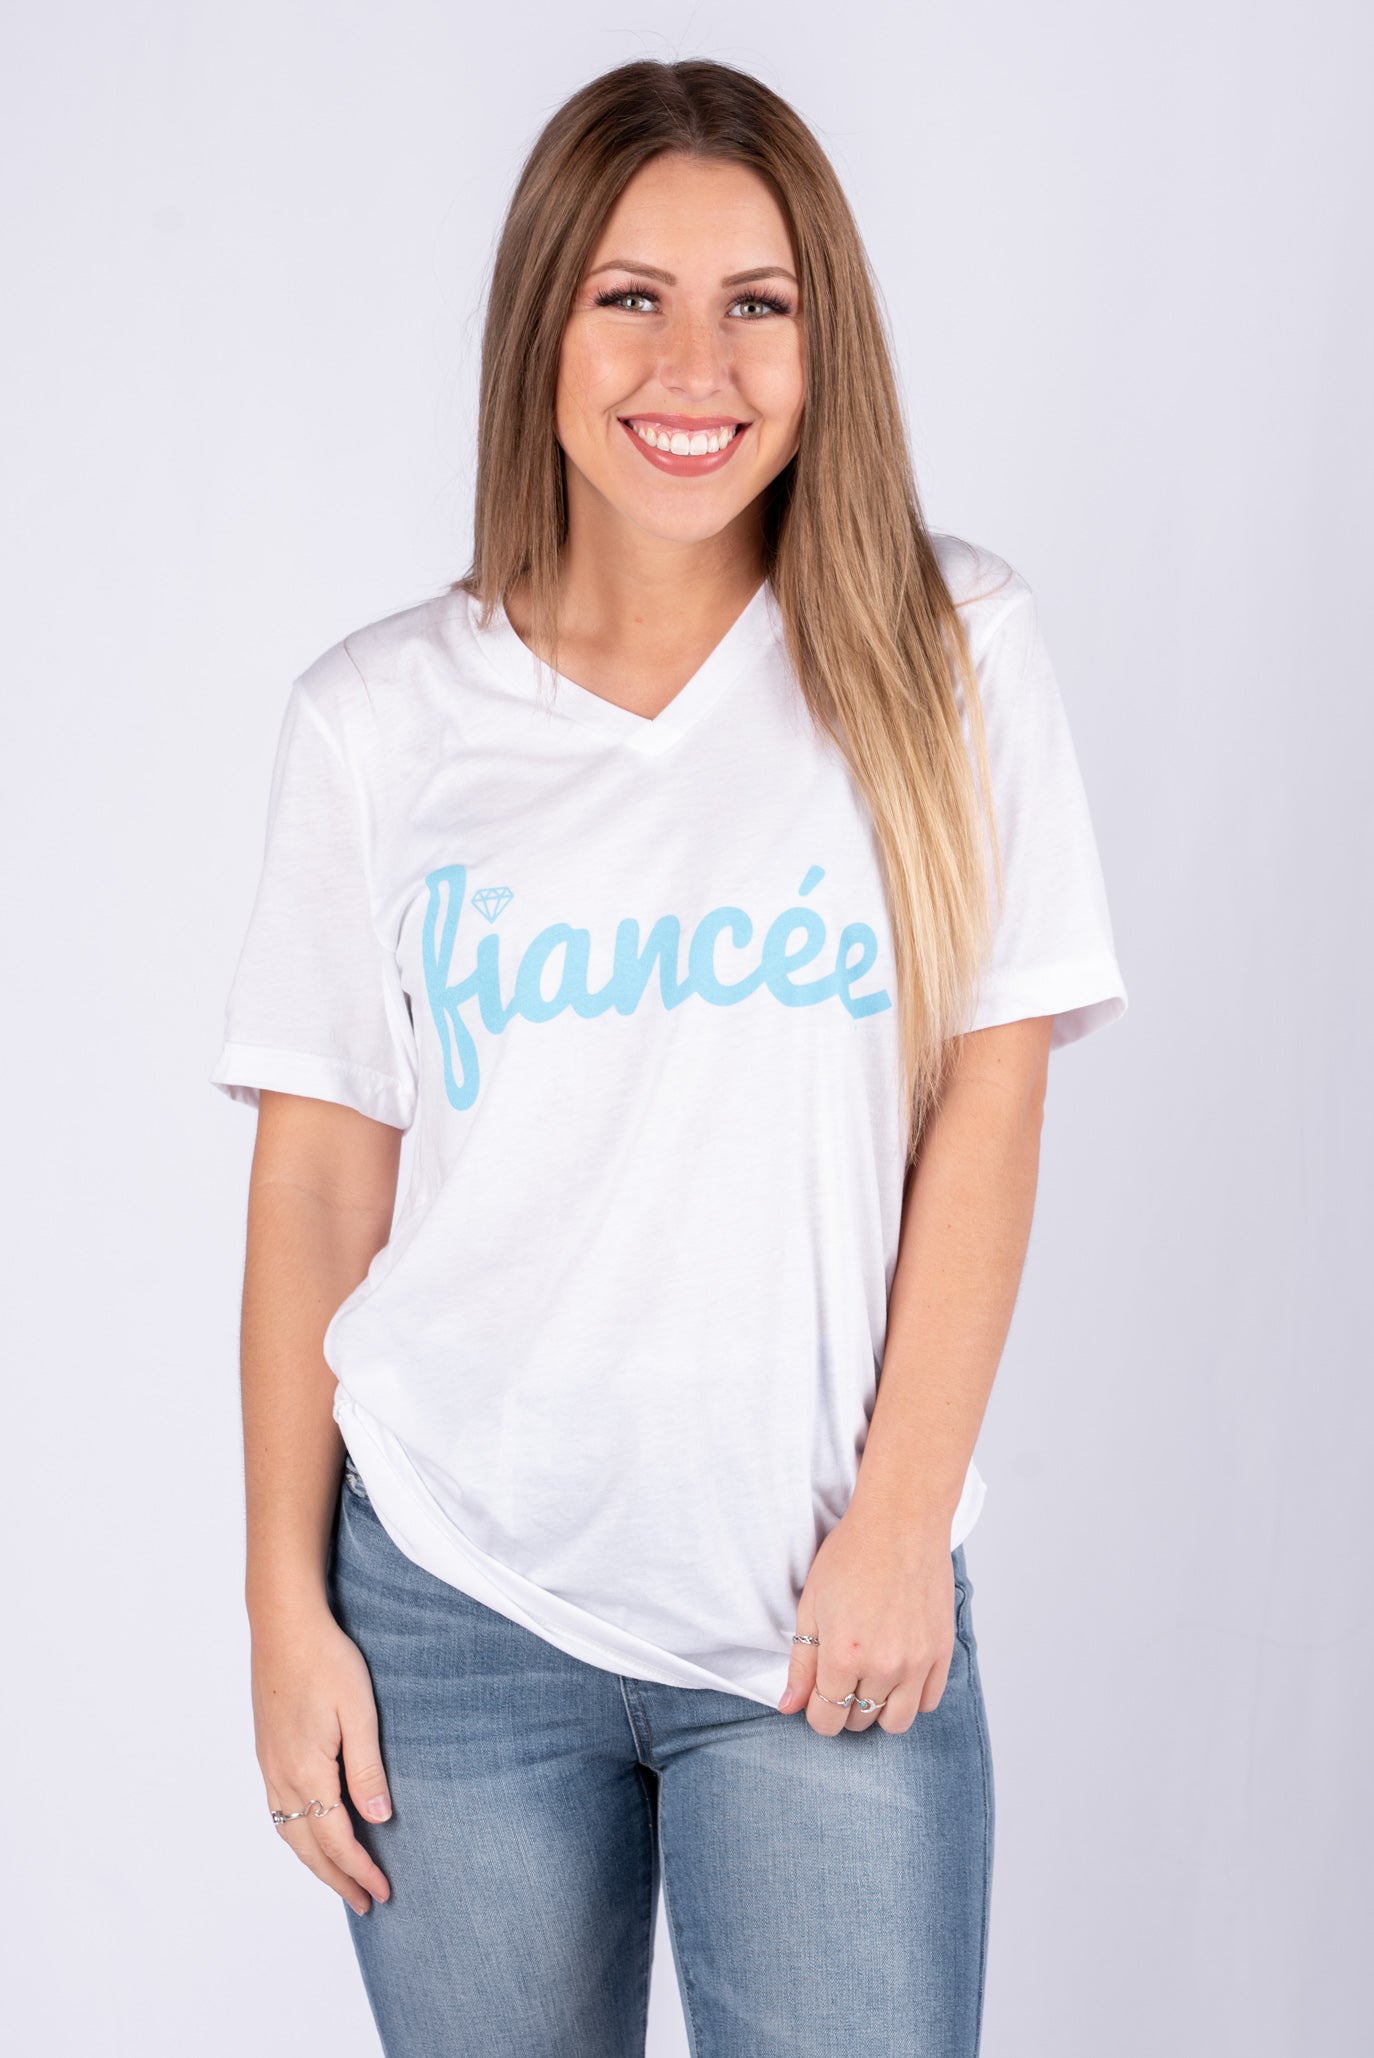 Fiancee v-neck short sleeve t-shirt white - Stylish T-shirts - Trendy Graphic T-Shirts and Tank Tops at Lush Fashion Lounge Boutique in Oklahoma City